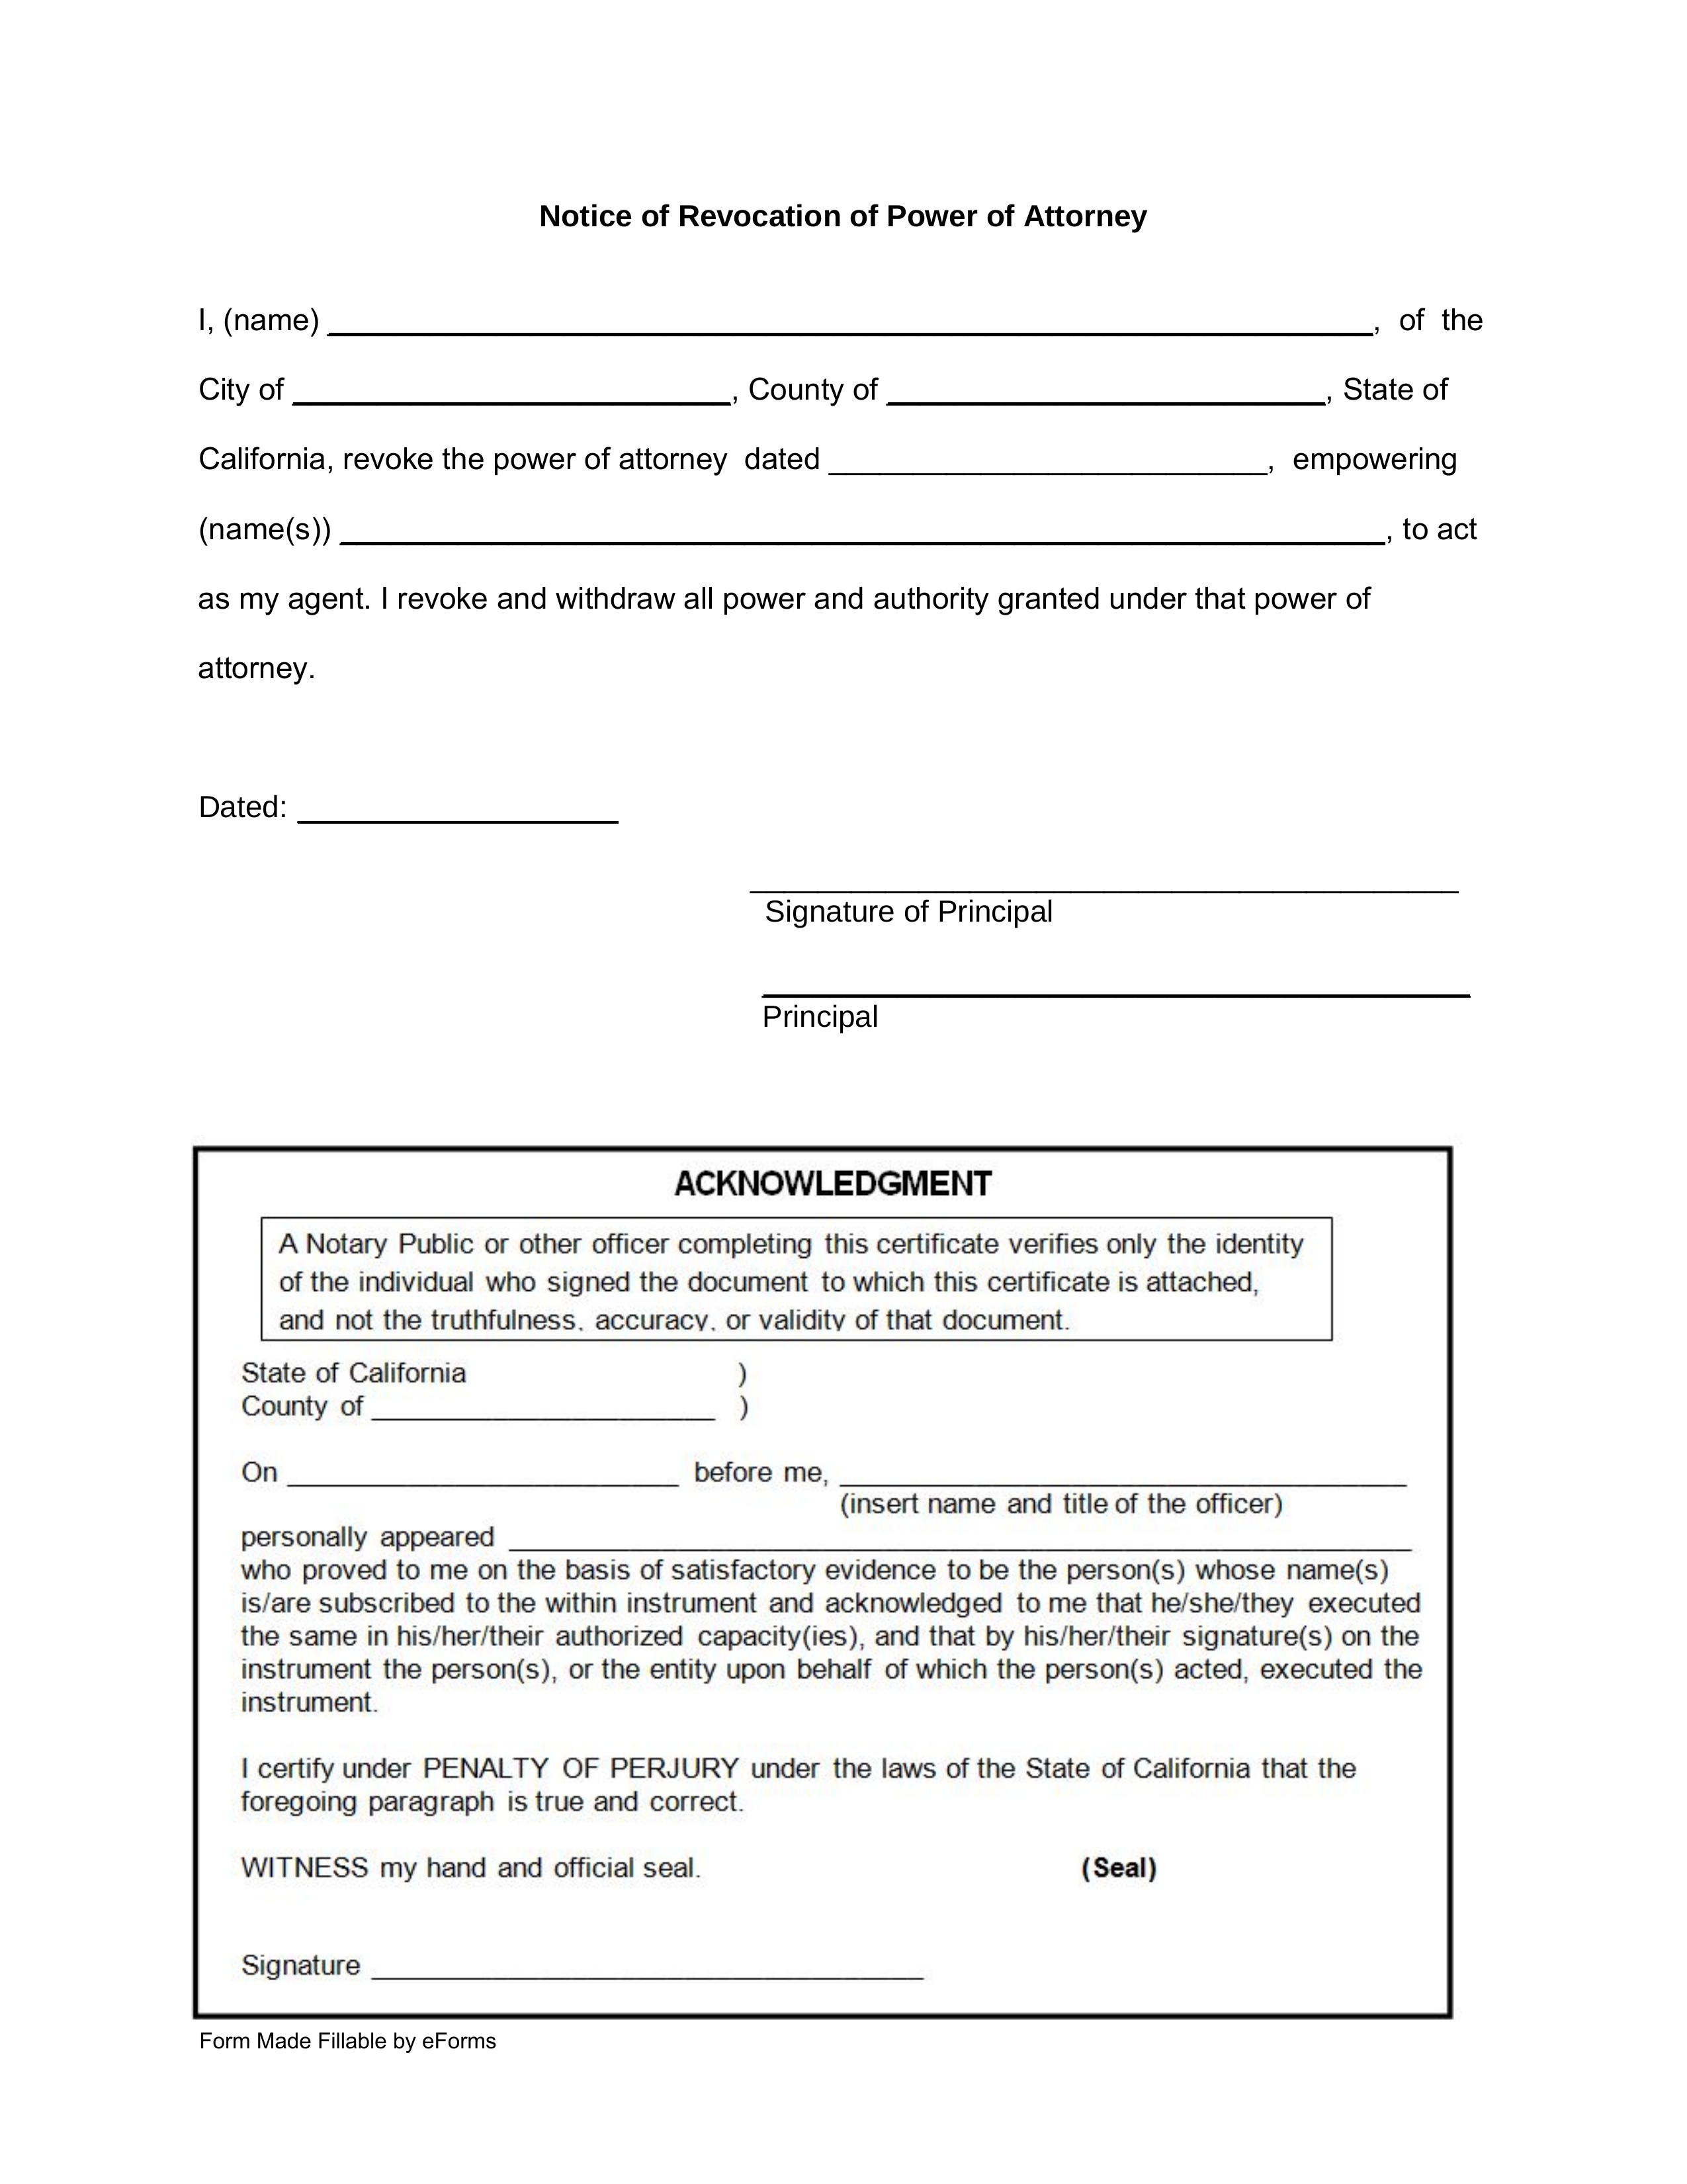 power of attorney form california
 Free California Revocation of Power of Attorney Form - PDF ...